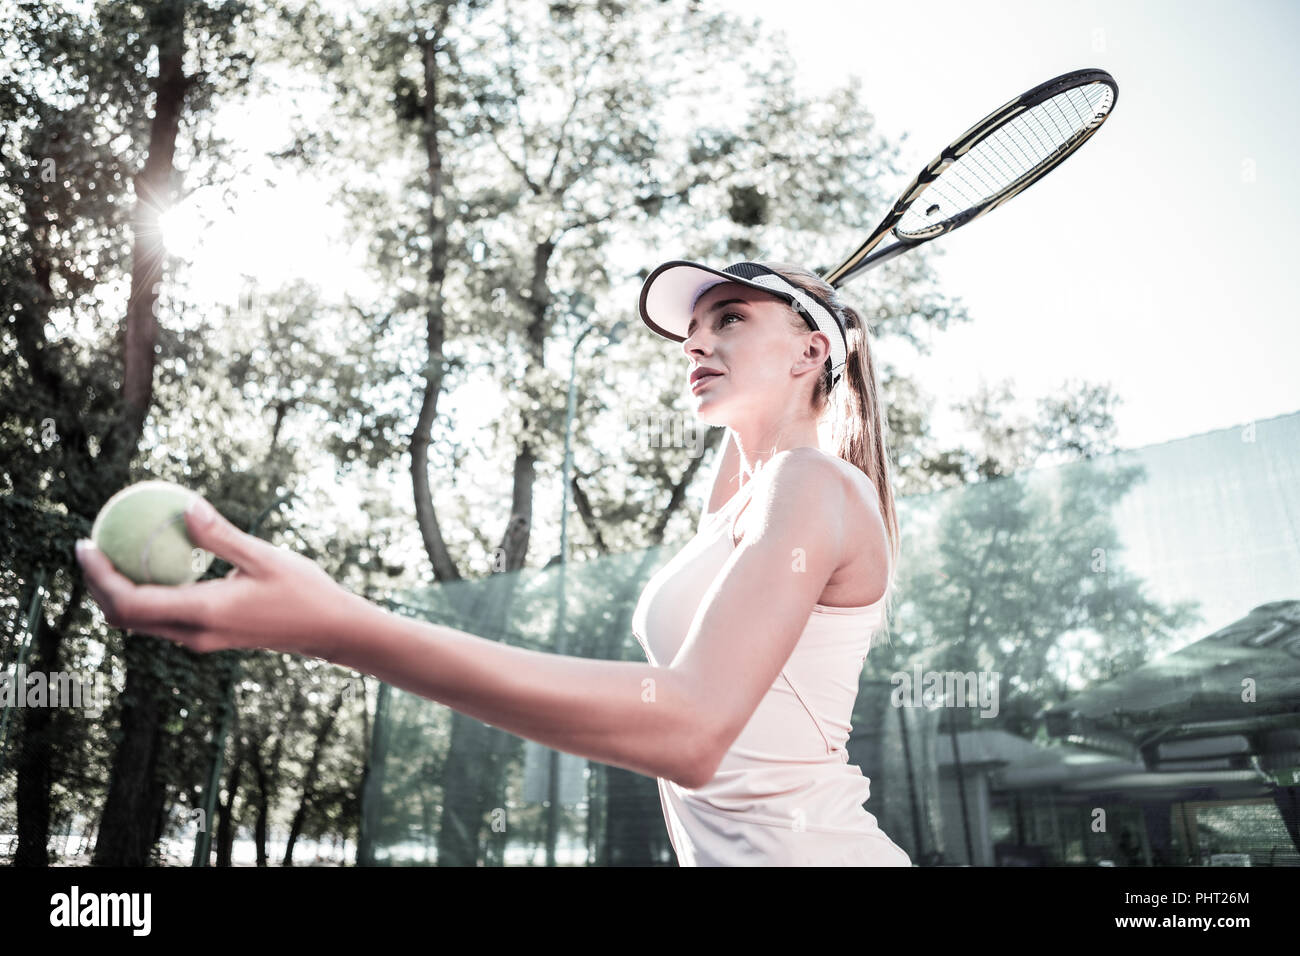 Diligent attractive female player perfecting tennis technique Stock Photo